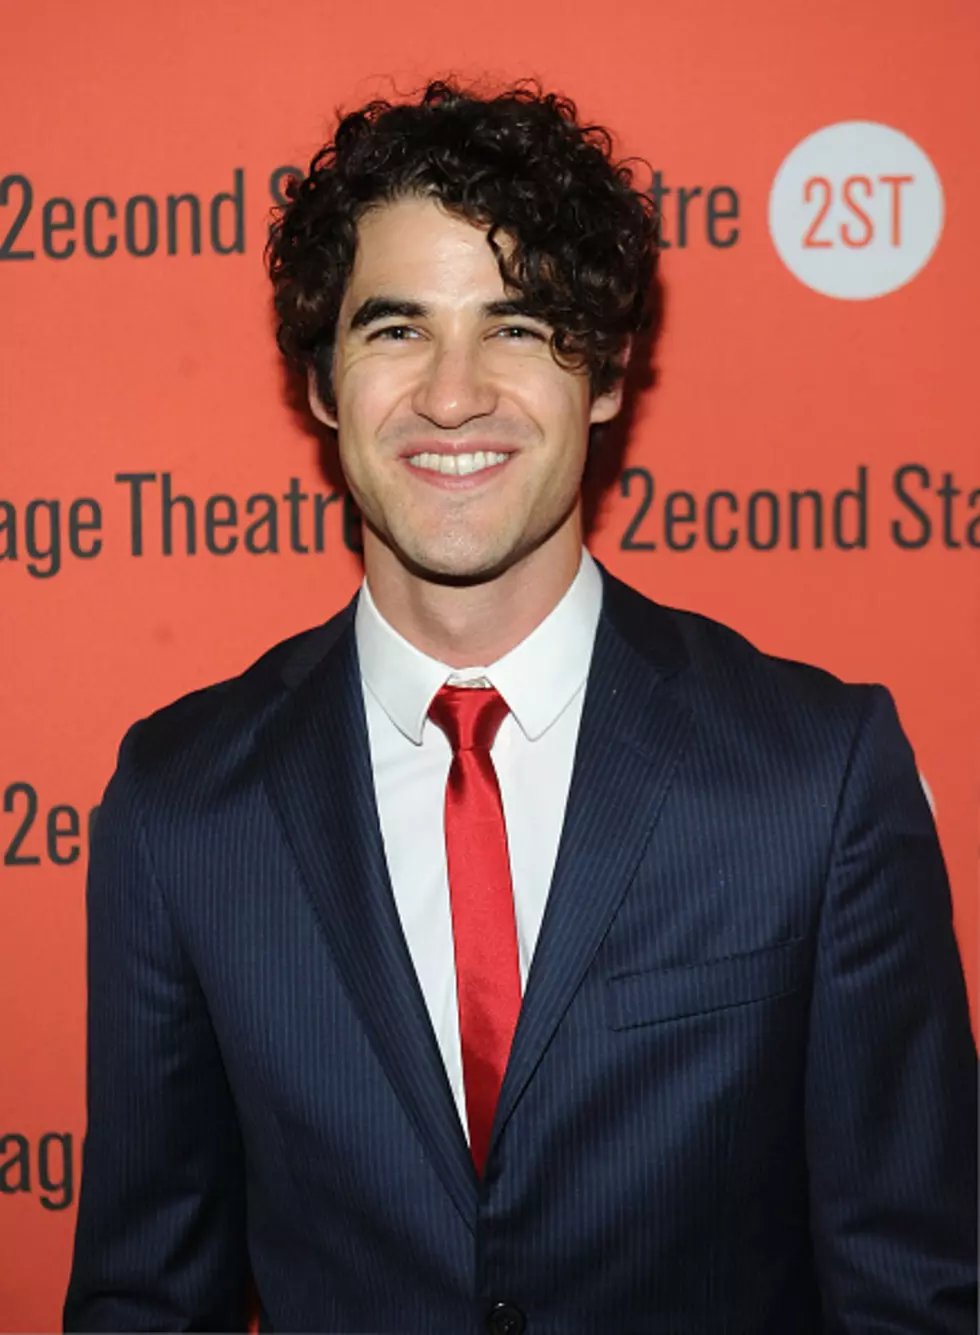 Darren Criss to lead ‘Hedwig and the Angry Inch’ on tour